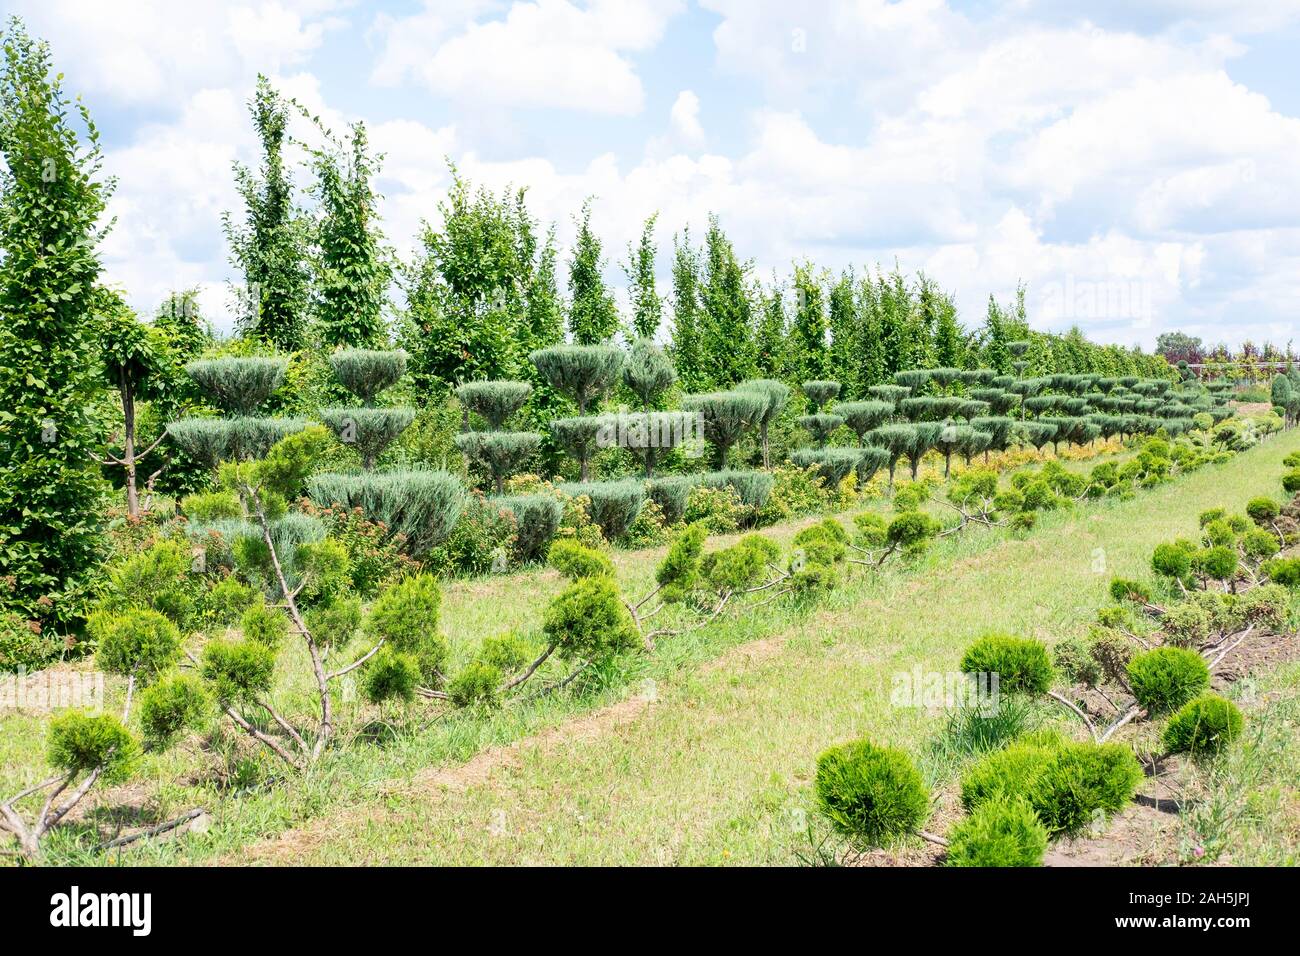 Plant nursery. Coniferous trees on the beds that are grown for sale and decoration of lawns Stock Photo